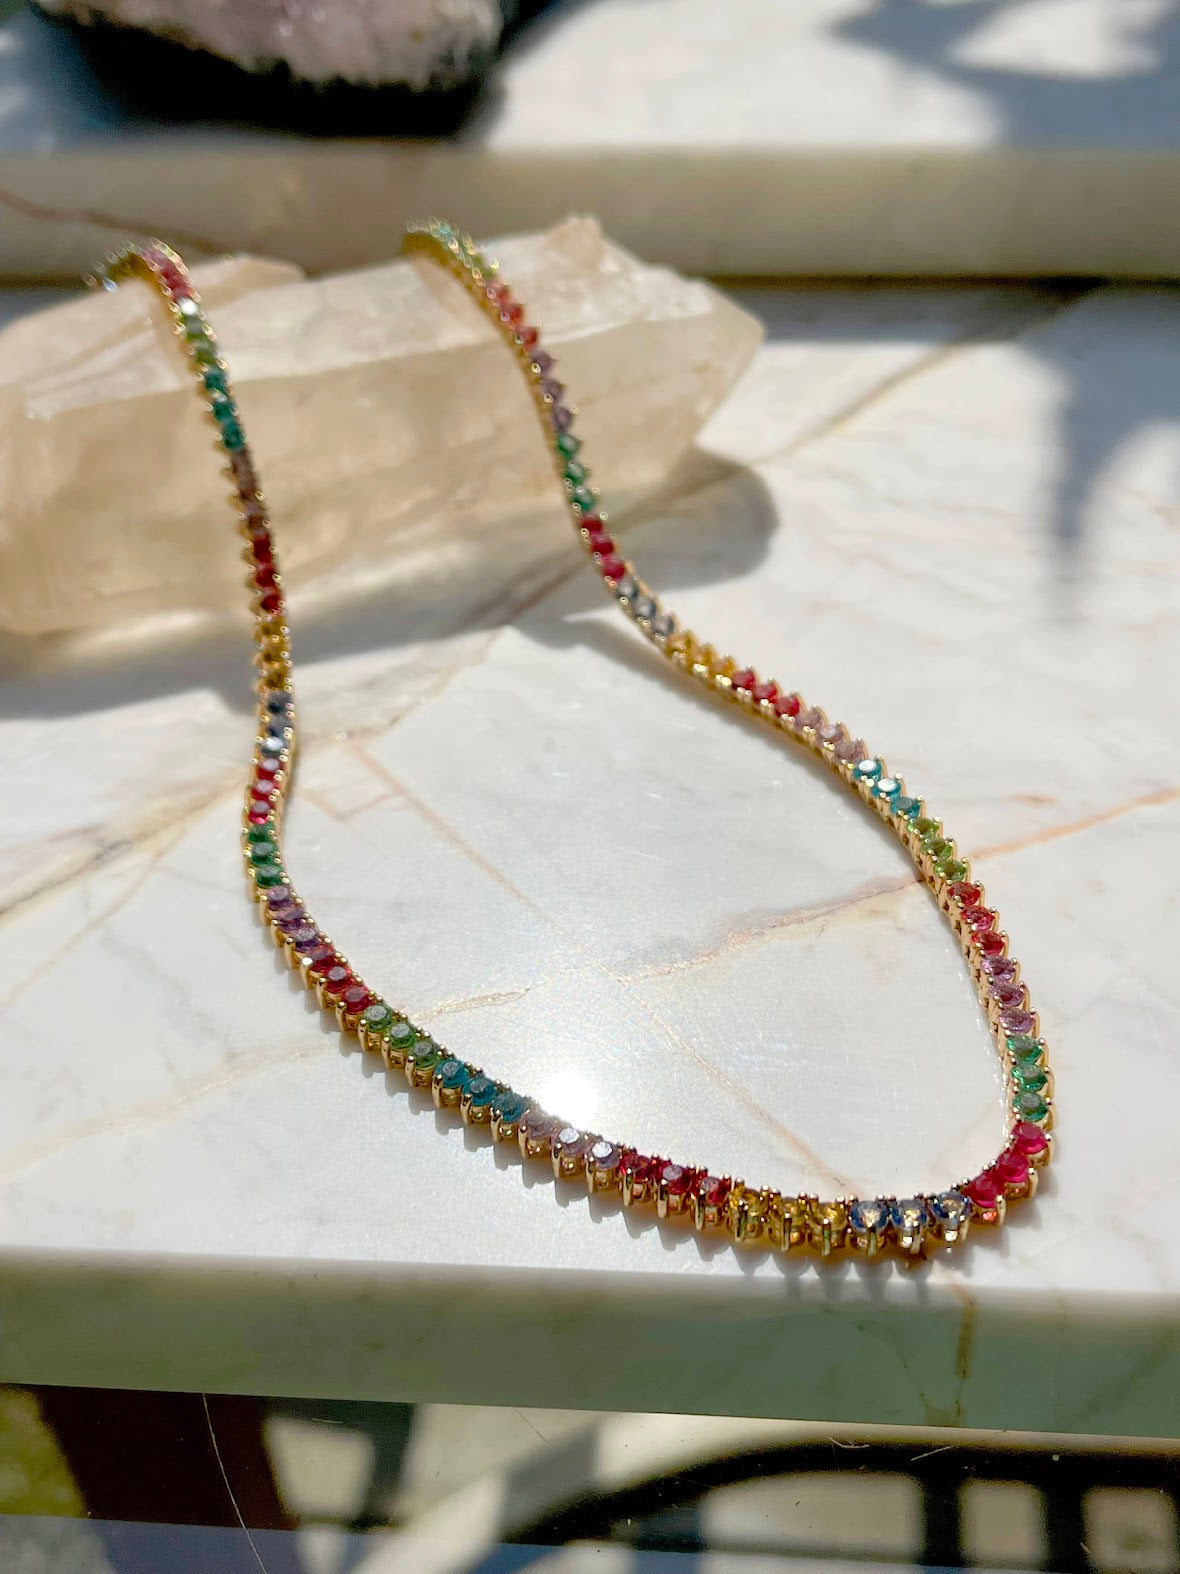 Tennis necklace with colorful crystals 18k gold plated